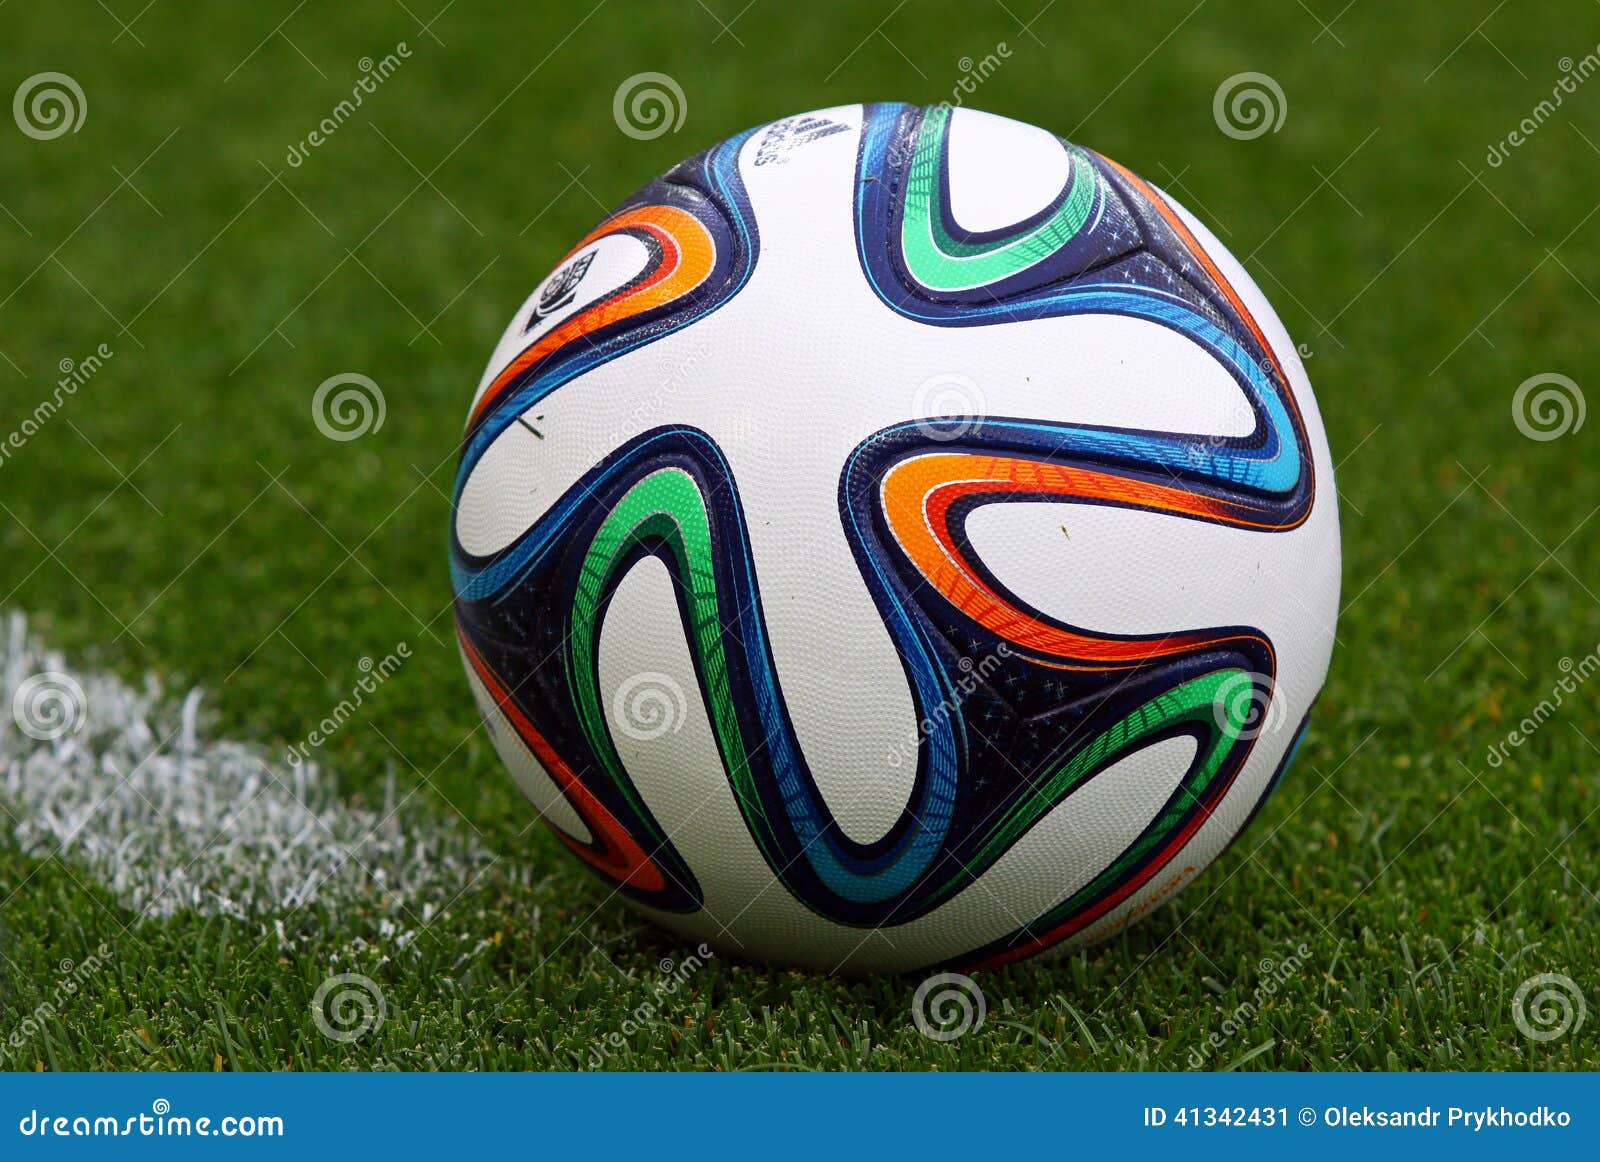 Close-up Official FIFA 2014 World Cup Ball (Brazuca) Editorial Photo -  Image of close, field: 41342431